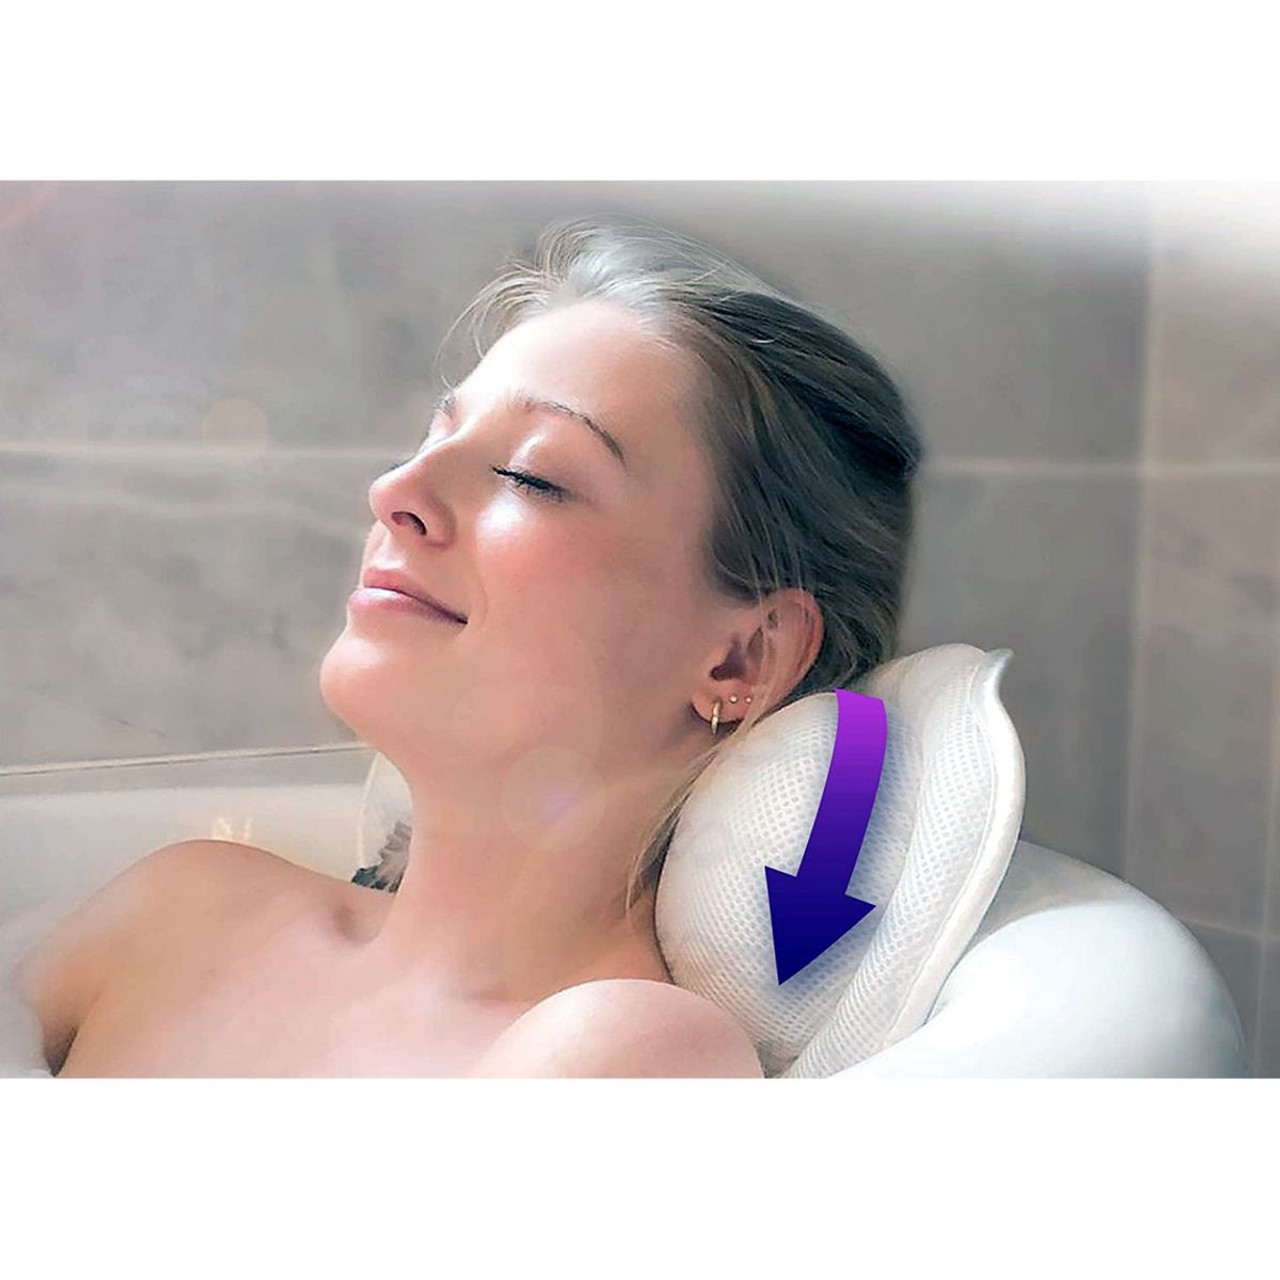 Luxury Relaxation Bath Tub Pillow product image